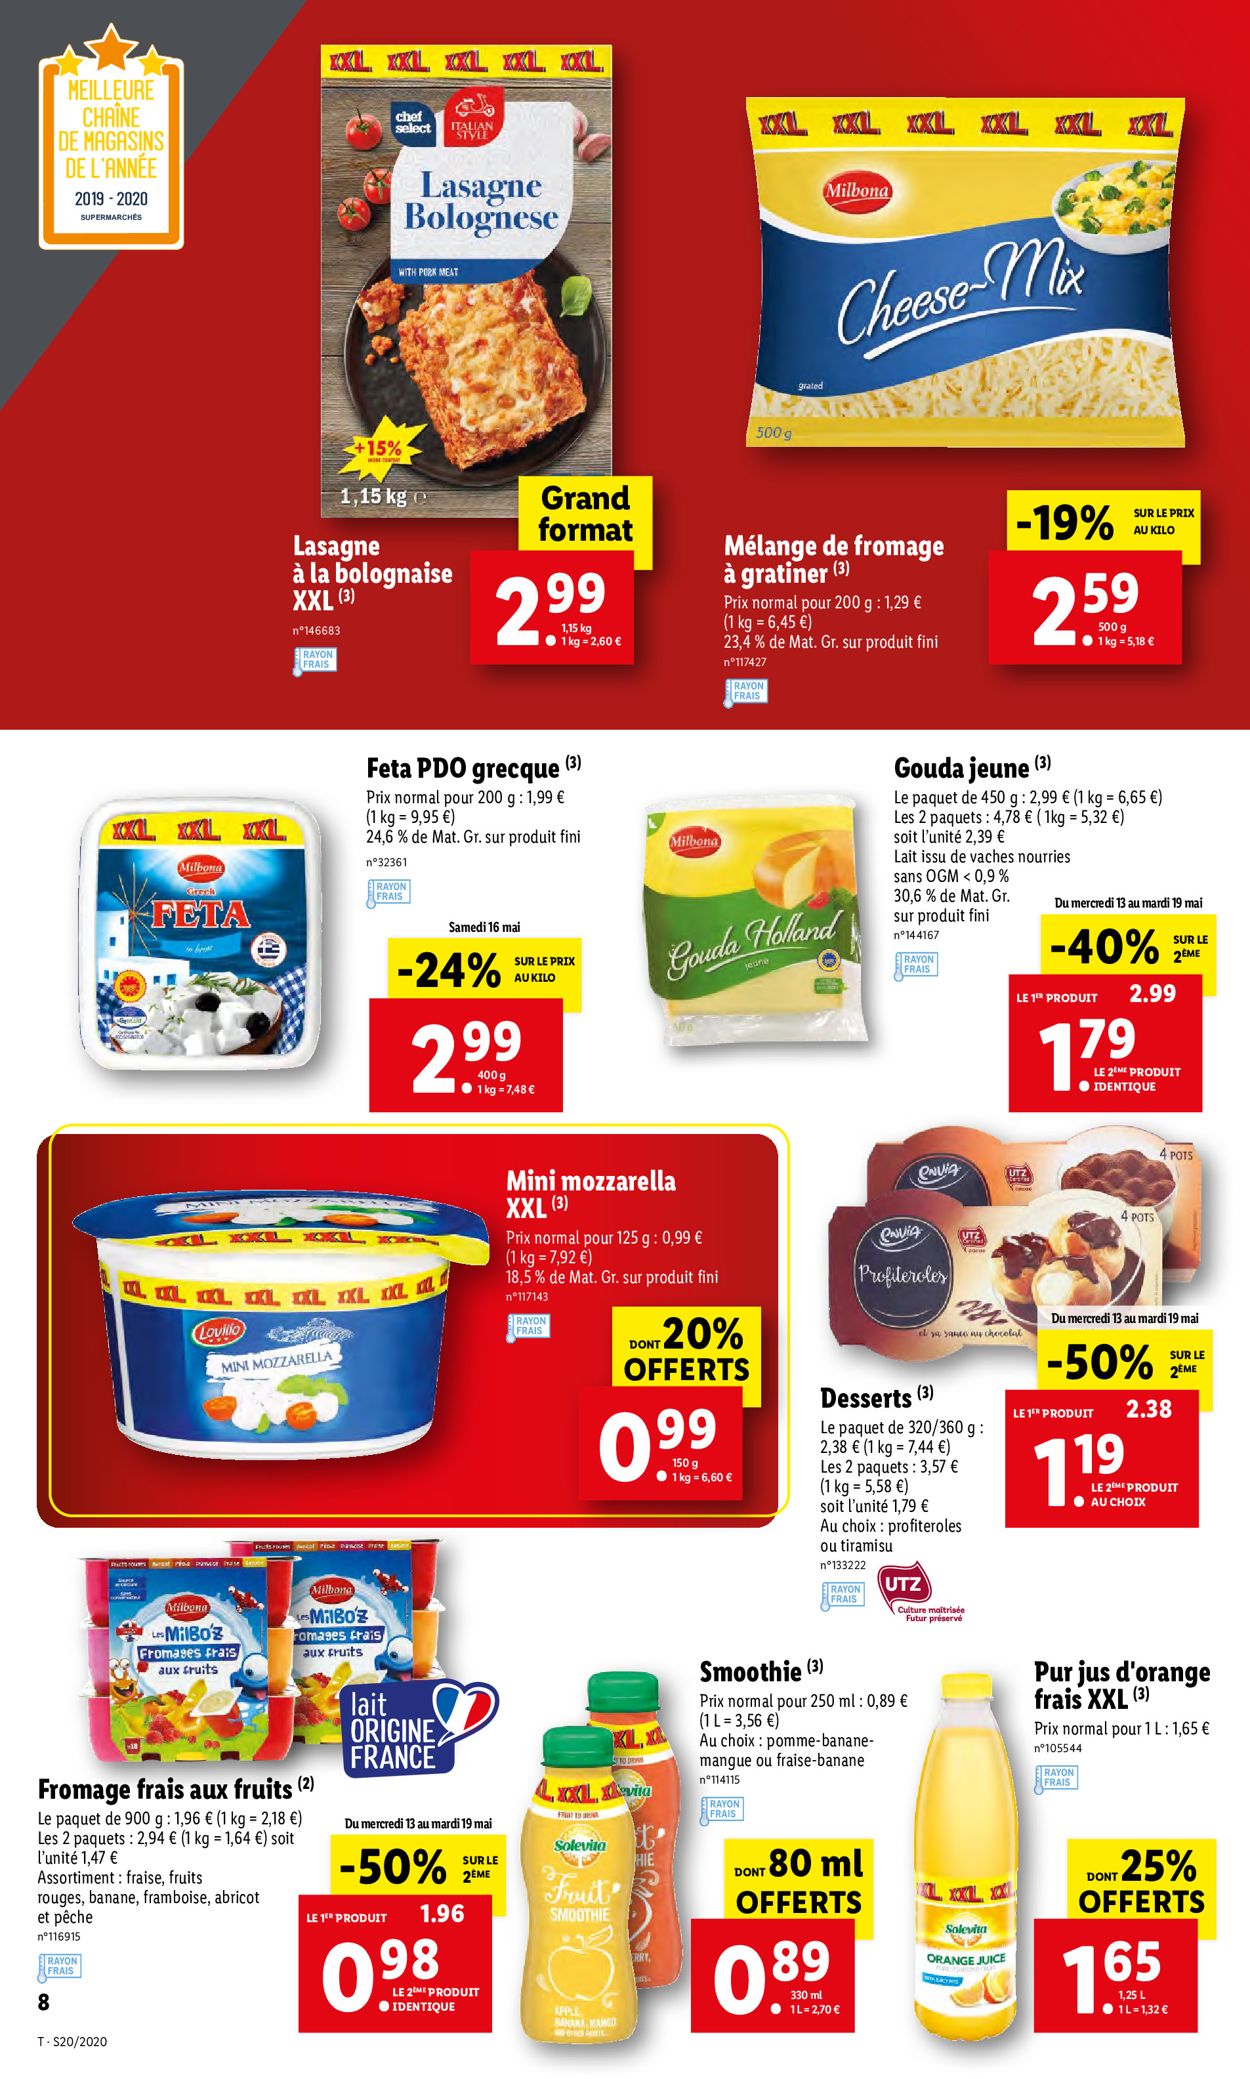 Lidl Catalogue - 13.05-19.05.2020 (Page 8)